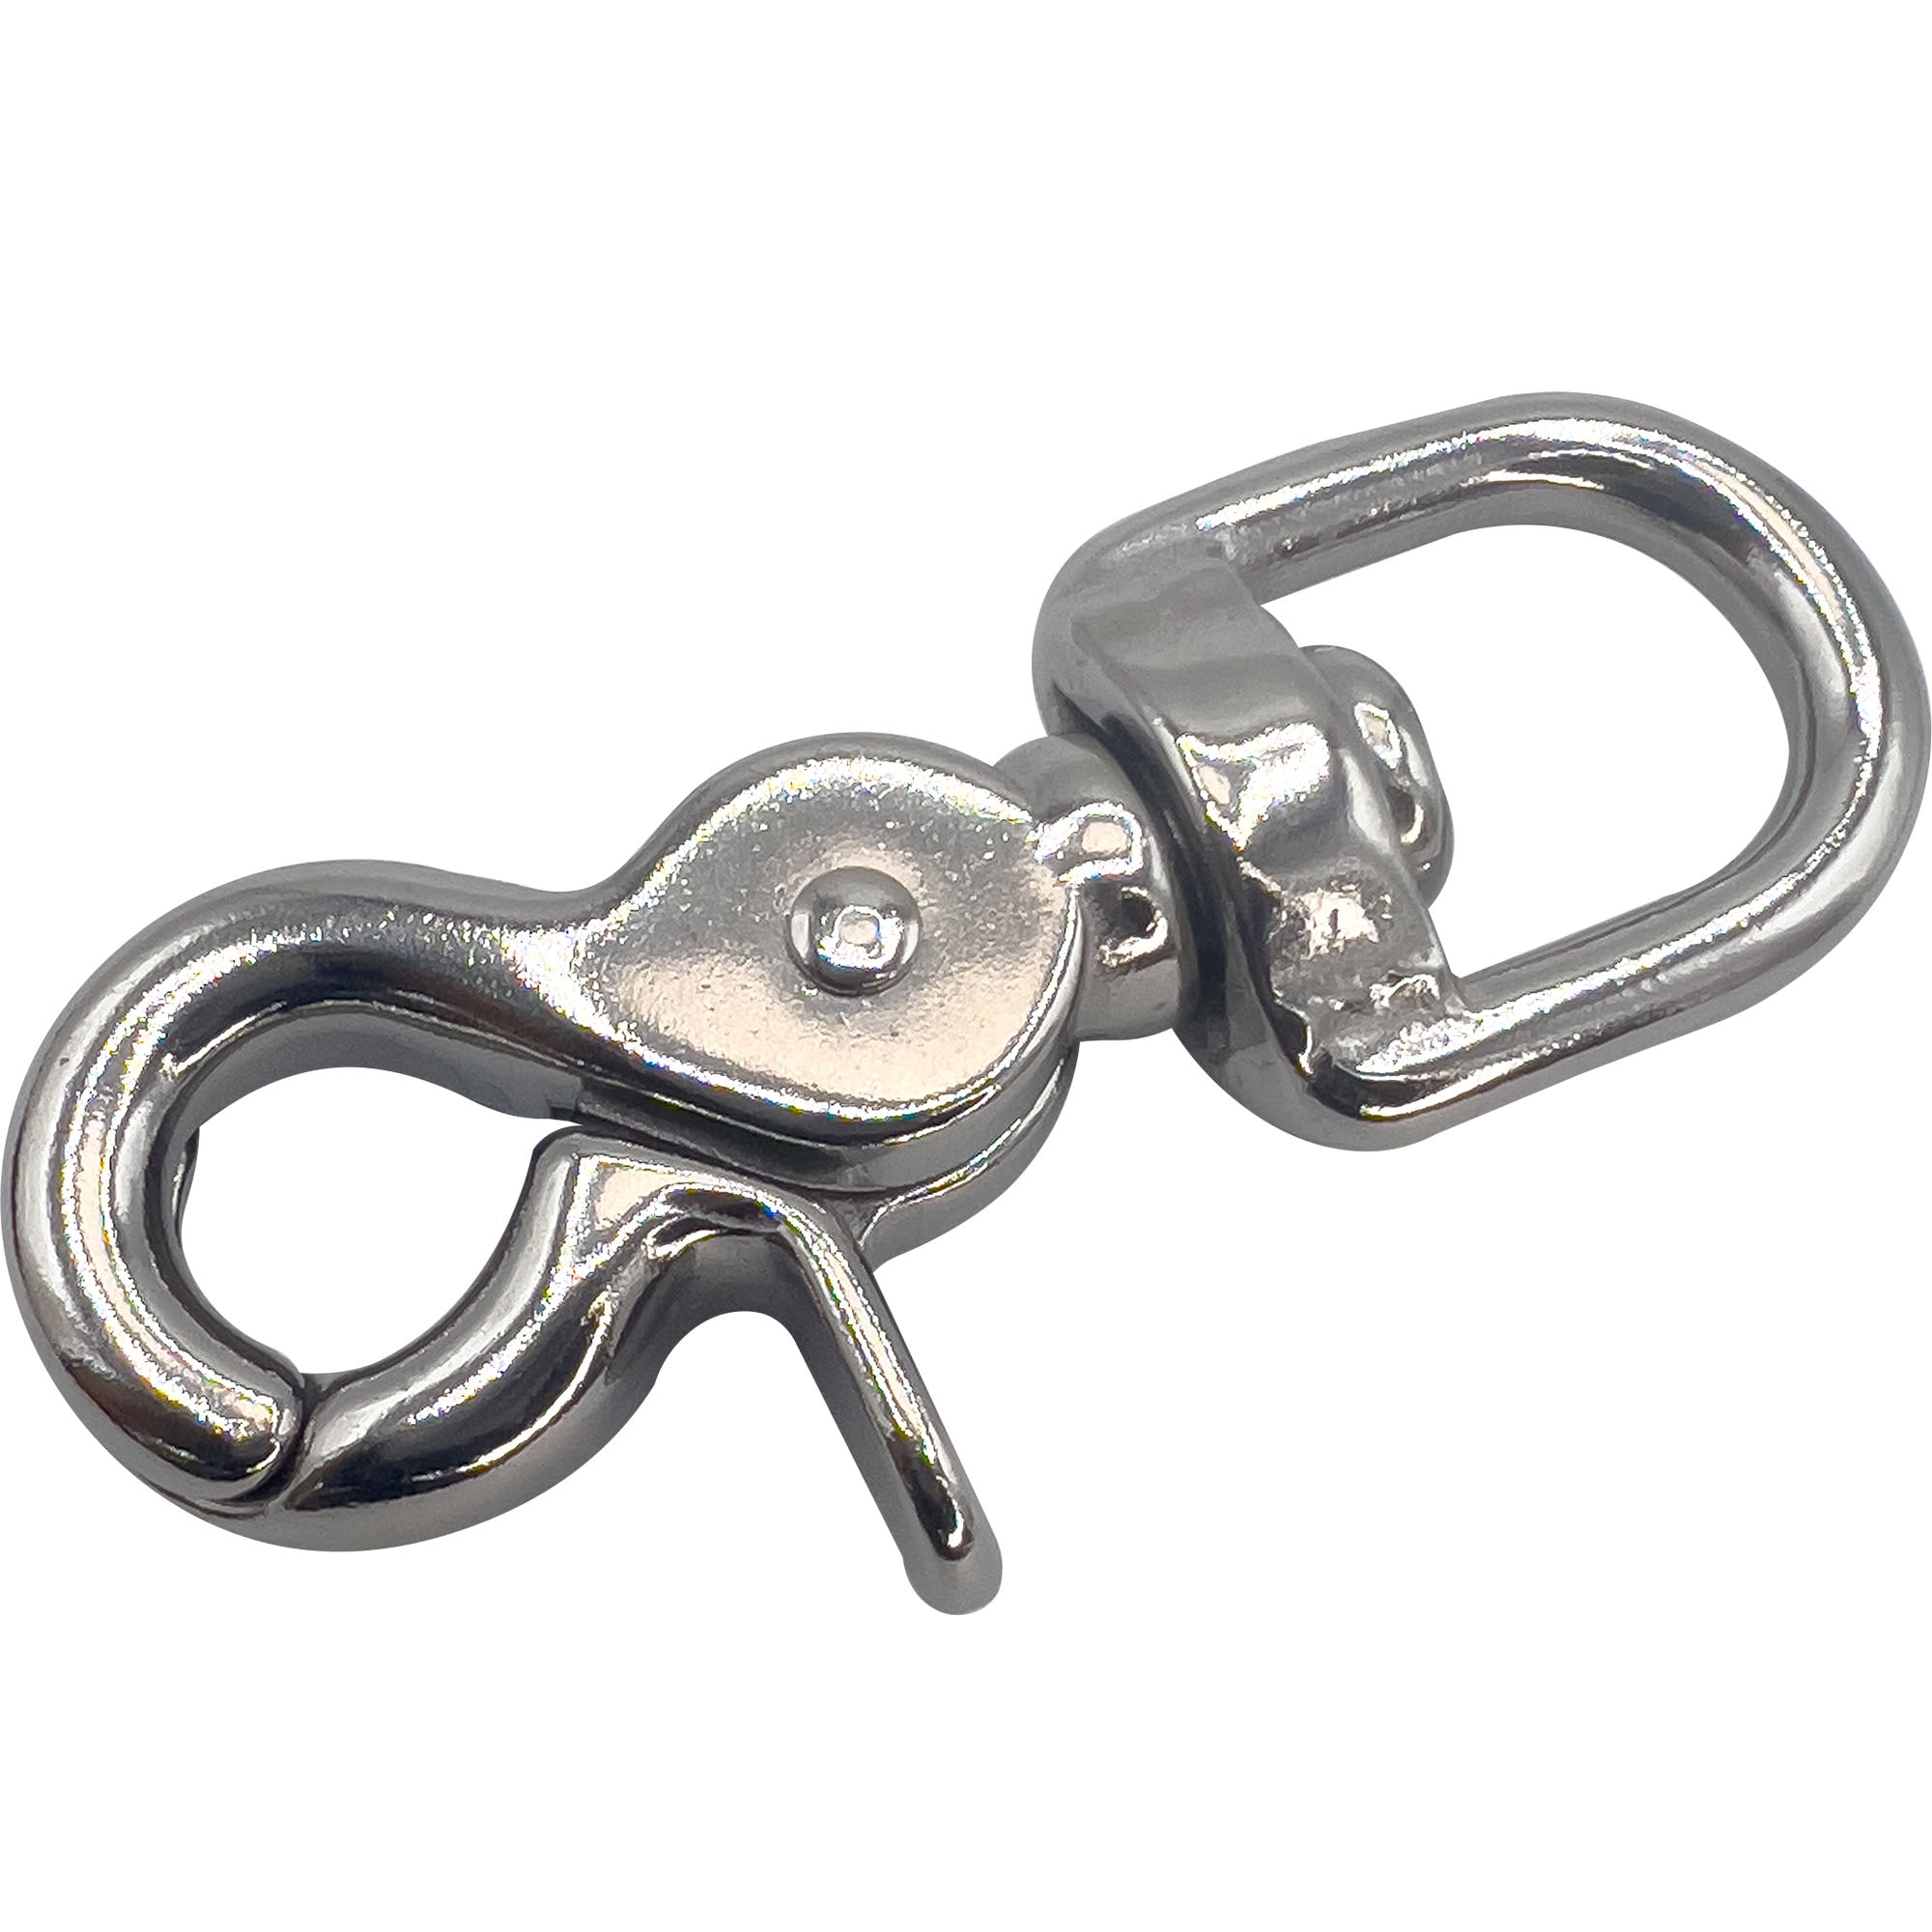 7017 Round Ring Cage Lock 0.5 Inch Stainless Steel